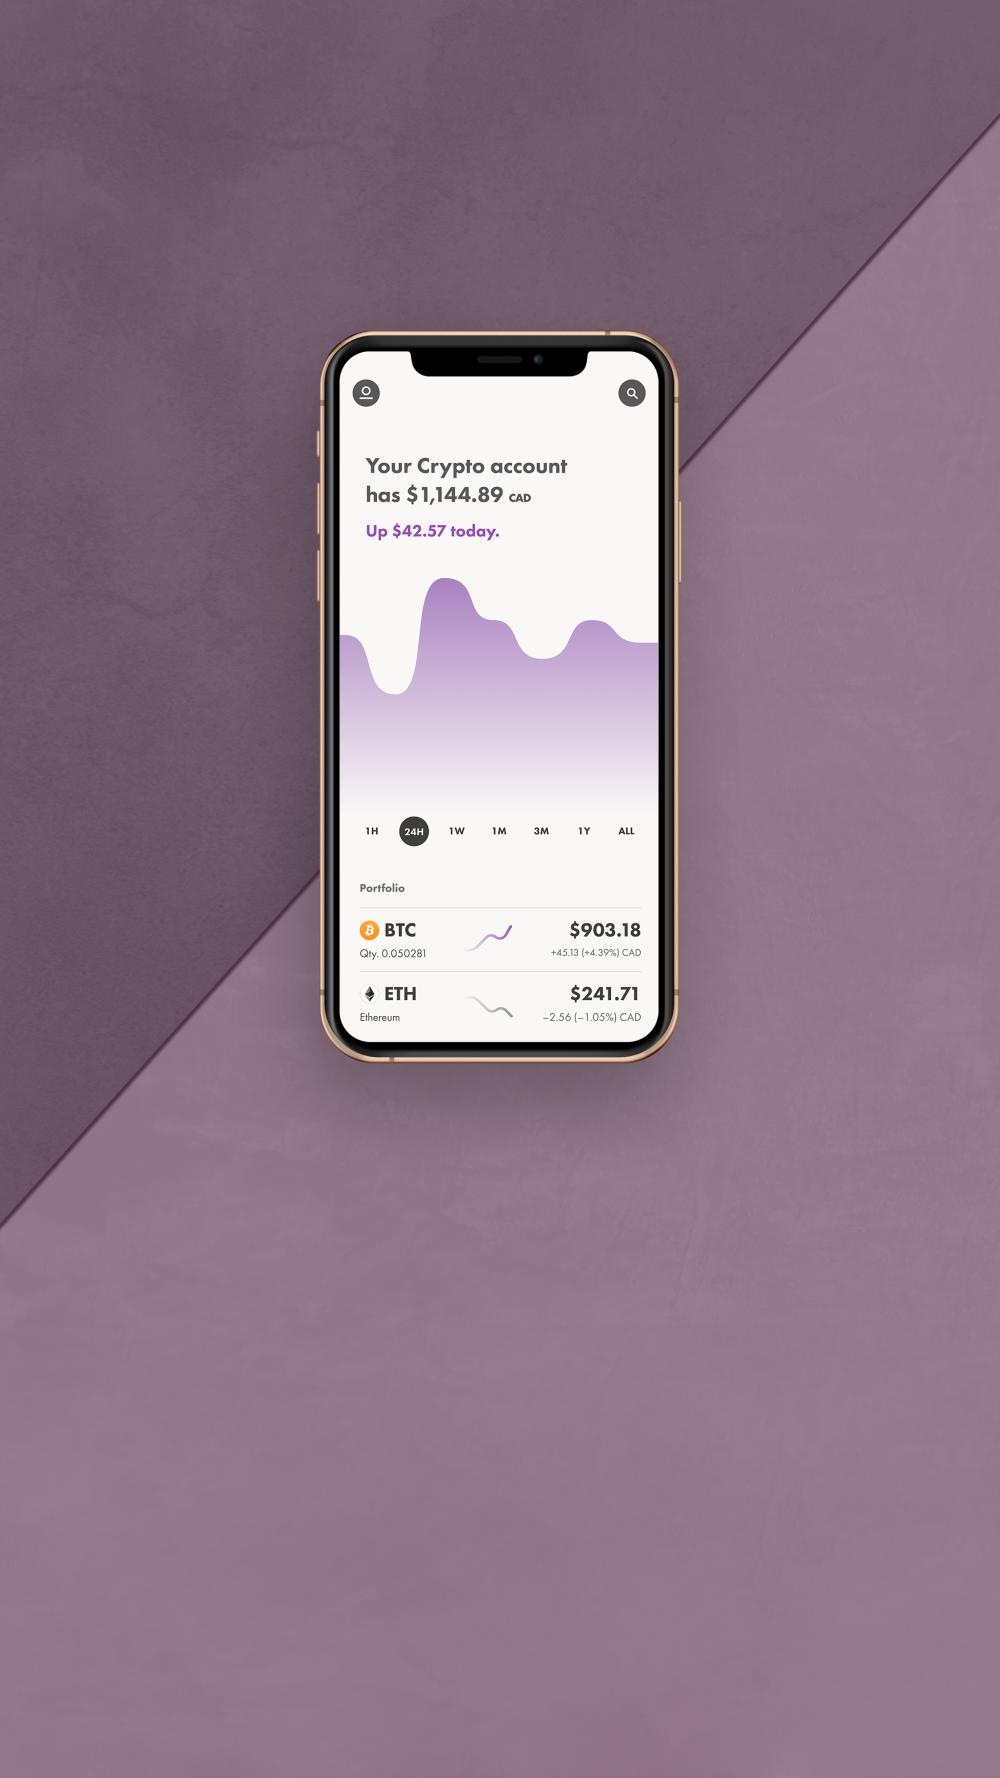 Do you need a crypto wallet with wealthsimple